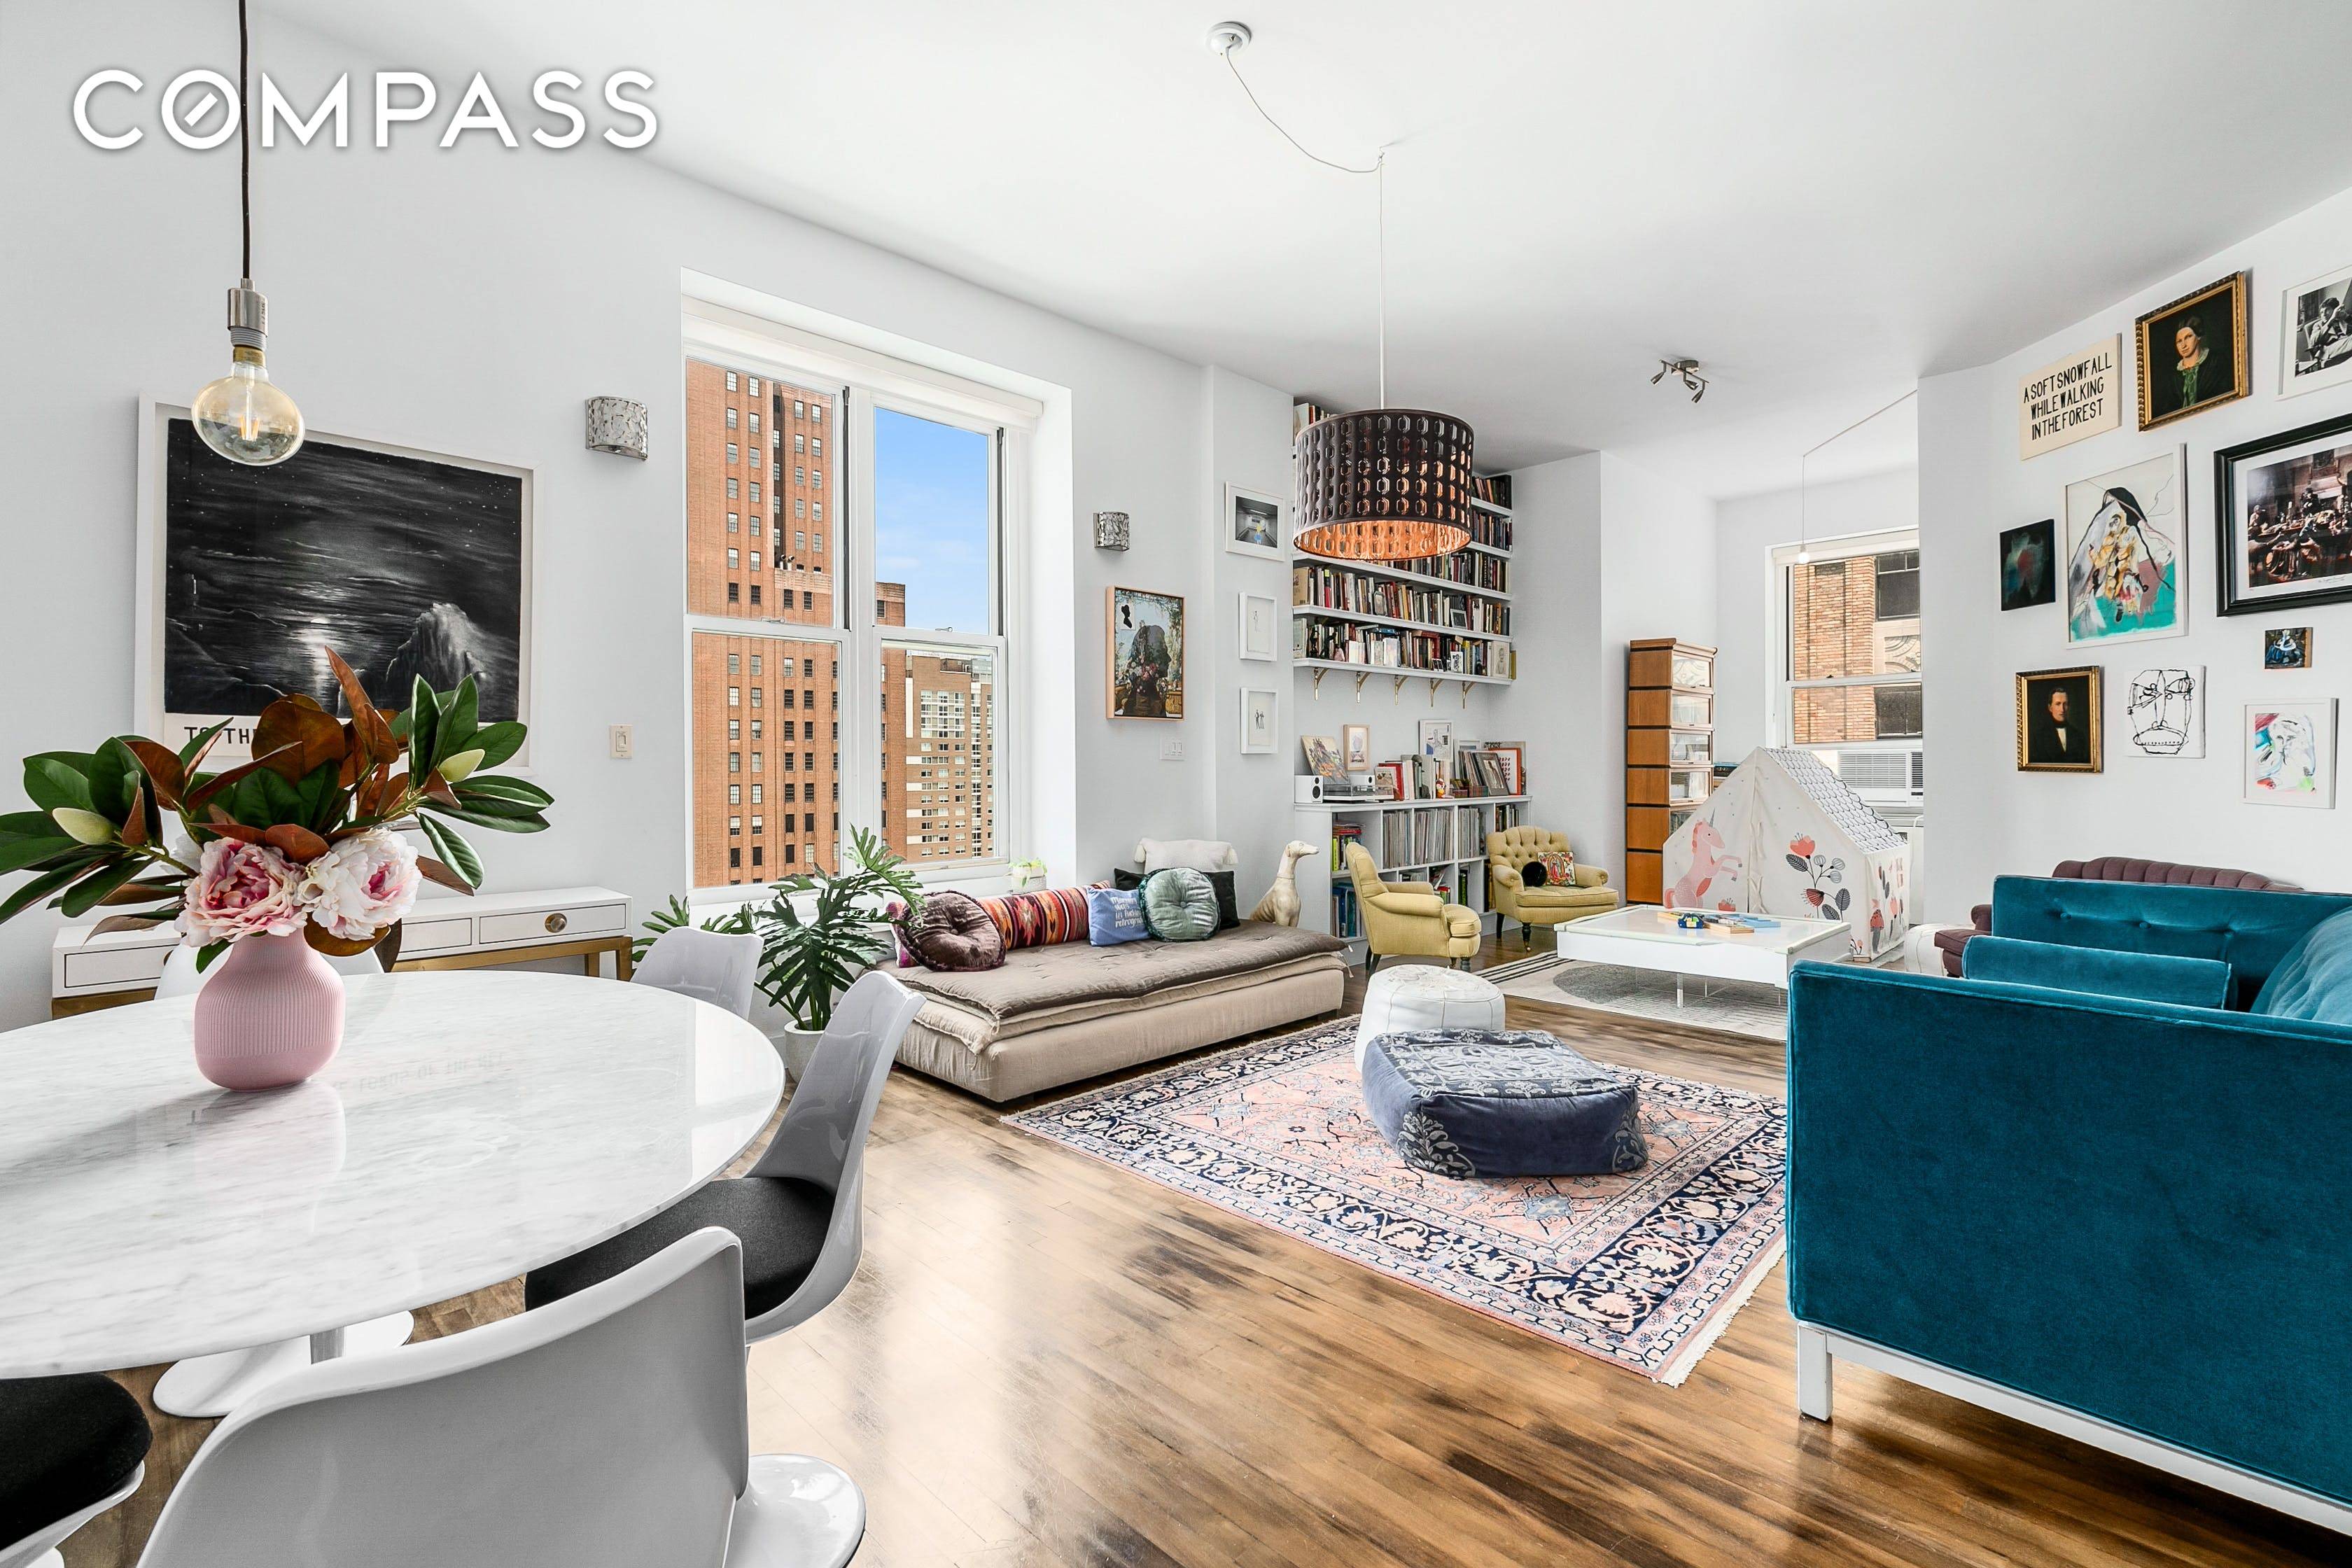 Authentic sun splashed north Tribeca loft with soaring 11 foot ceilings, original cast iron columns, stunning open views, and an expansive flexible floorplan.